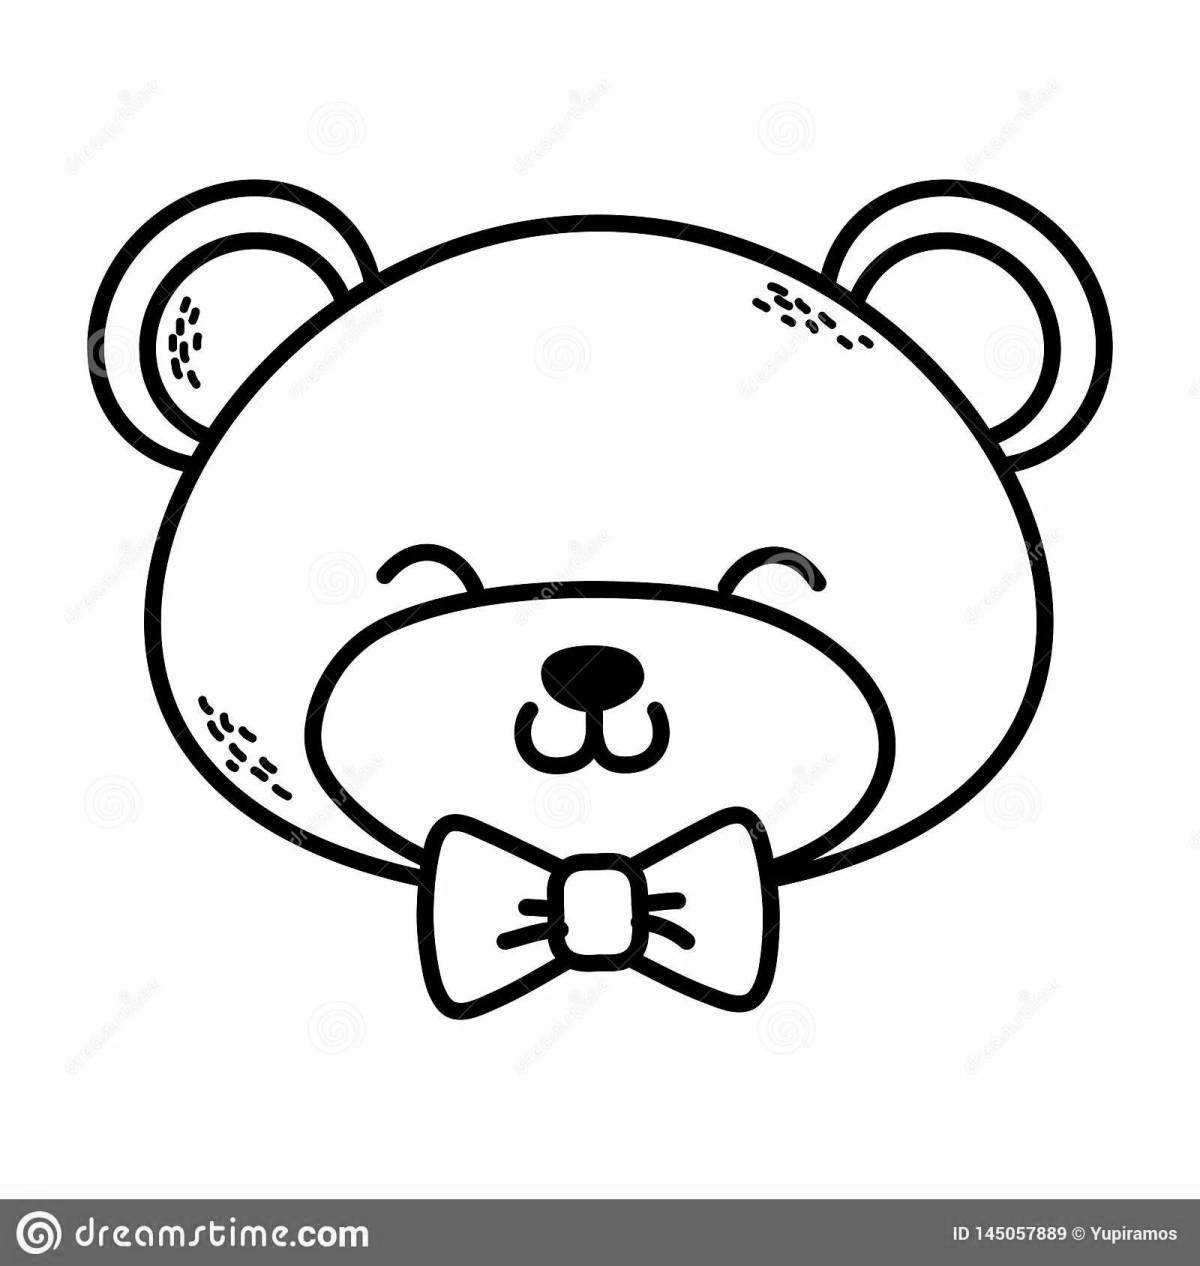 Cute bear coloring page